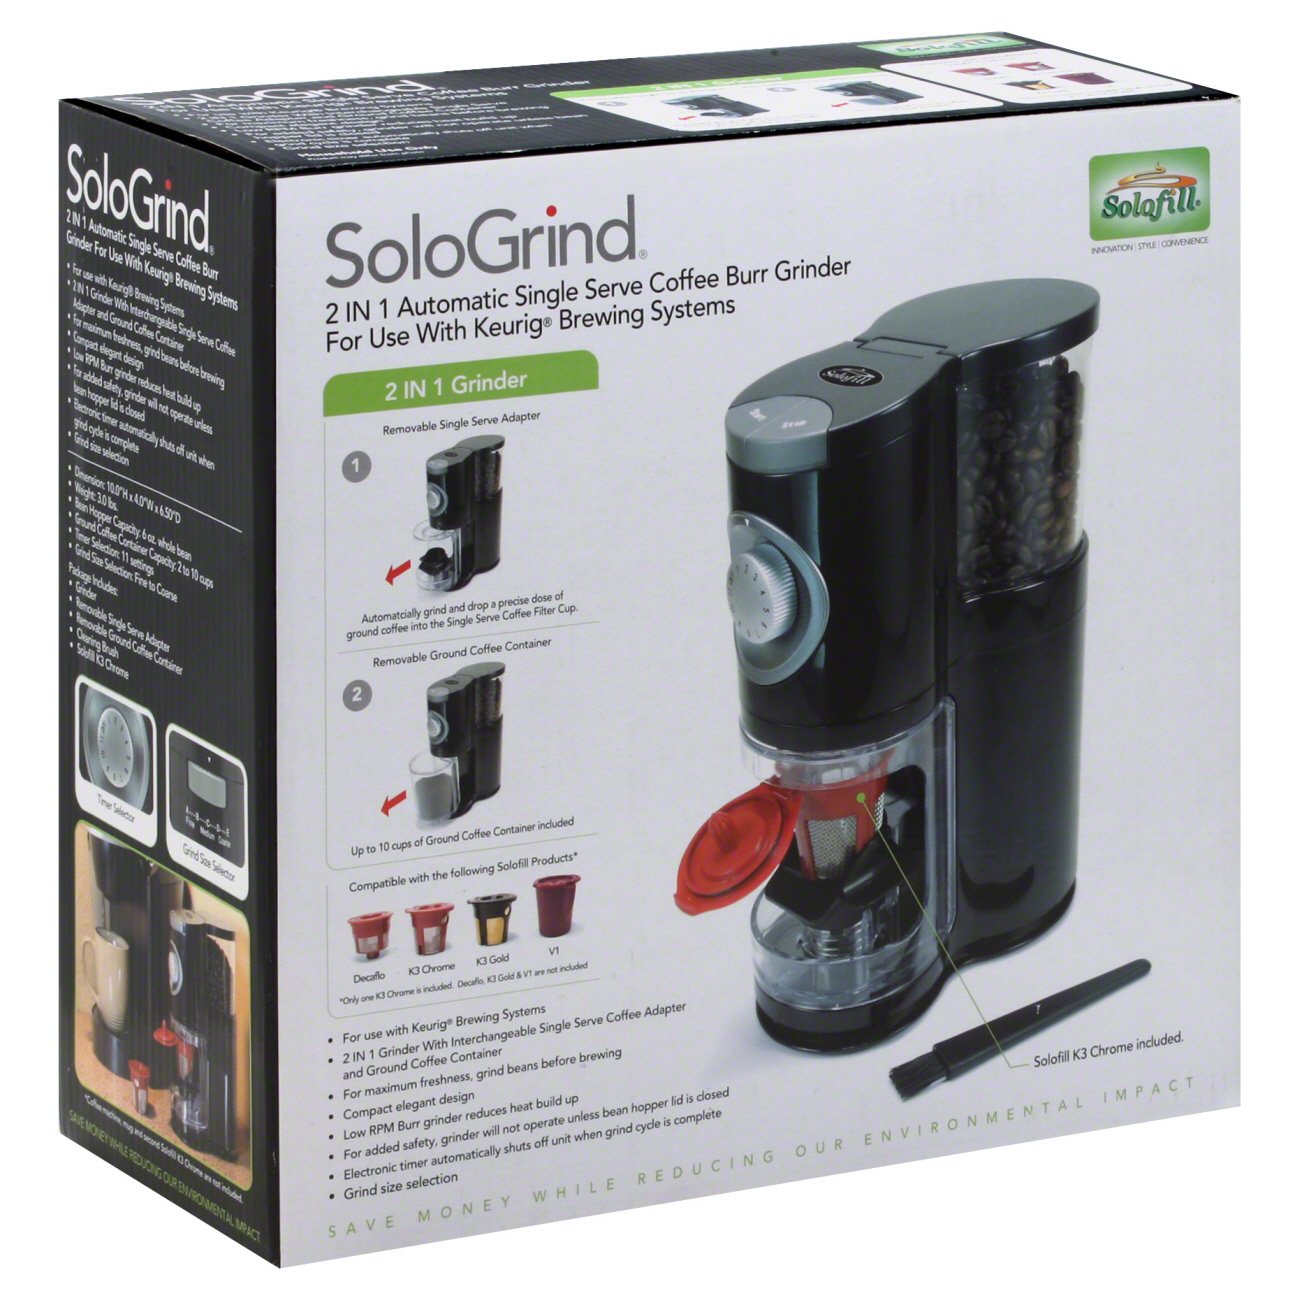 New! Solofill SoloGrind 2-in-1 Automatic Single Serve Coffee Burr